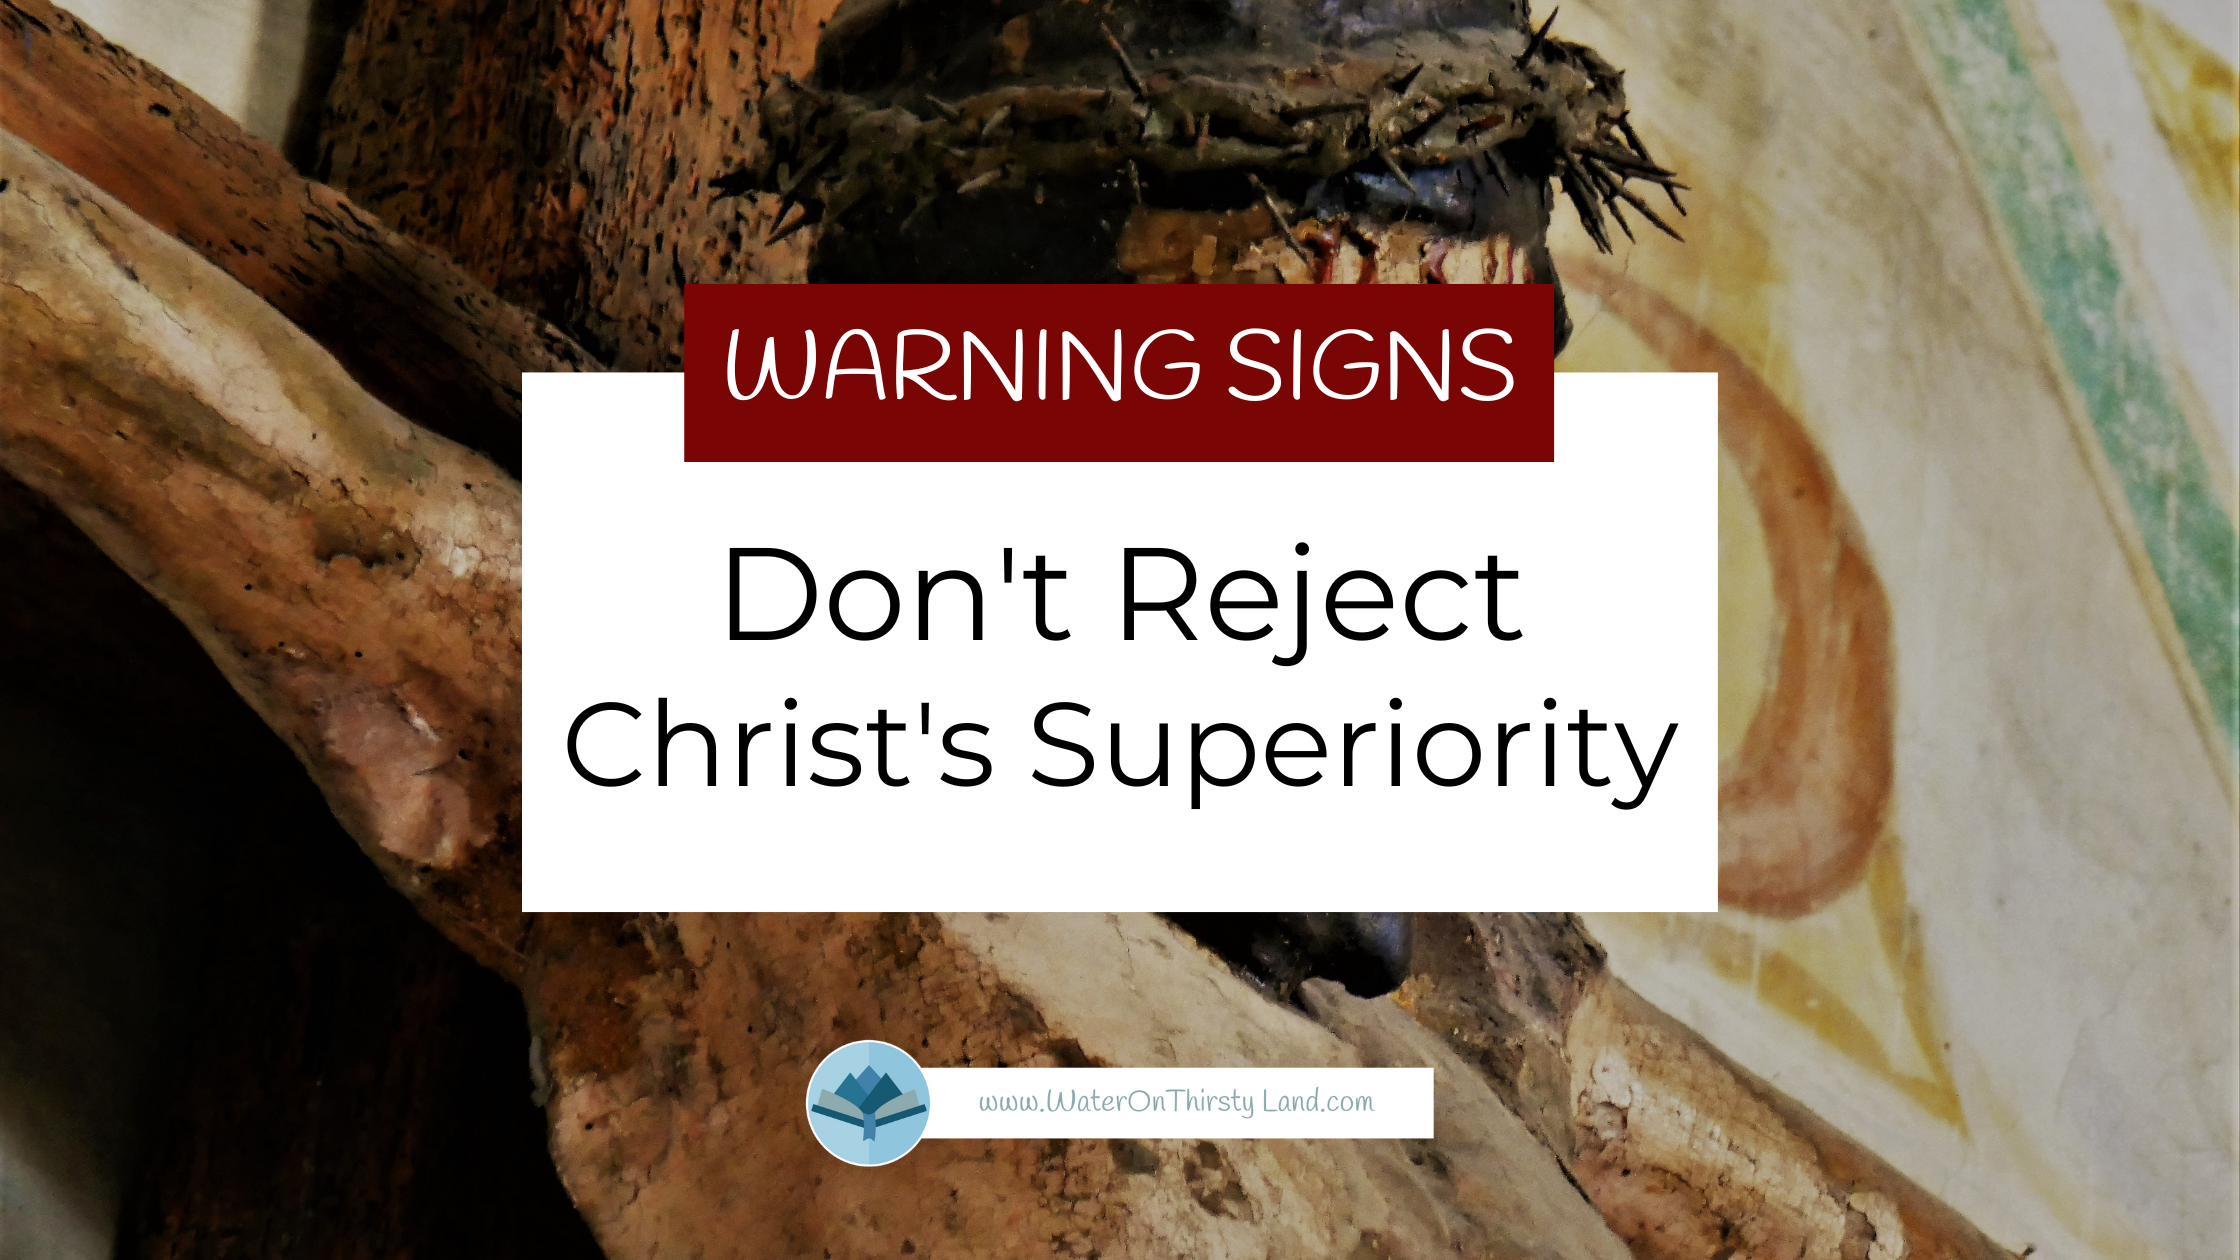 Don't Reject Christ's Superiority